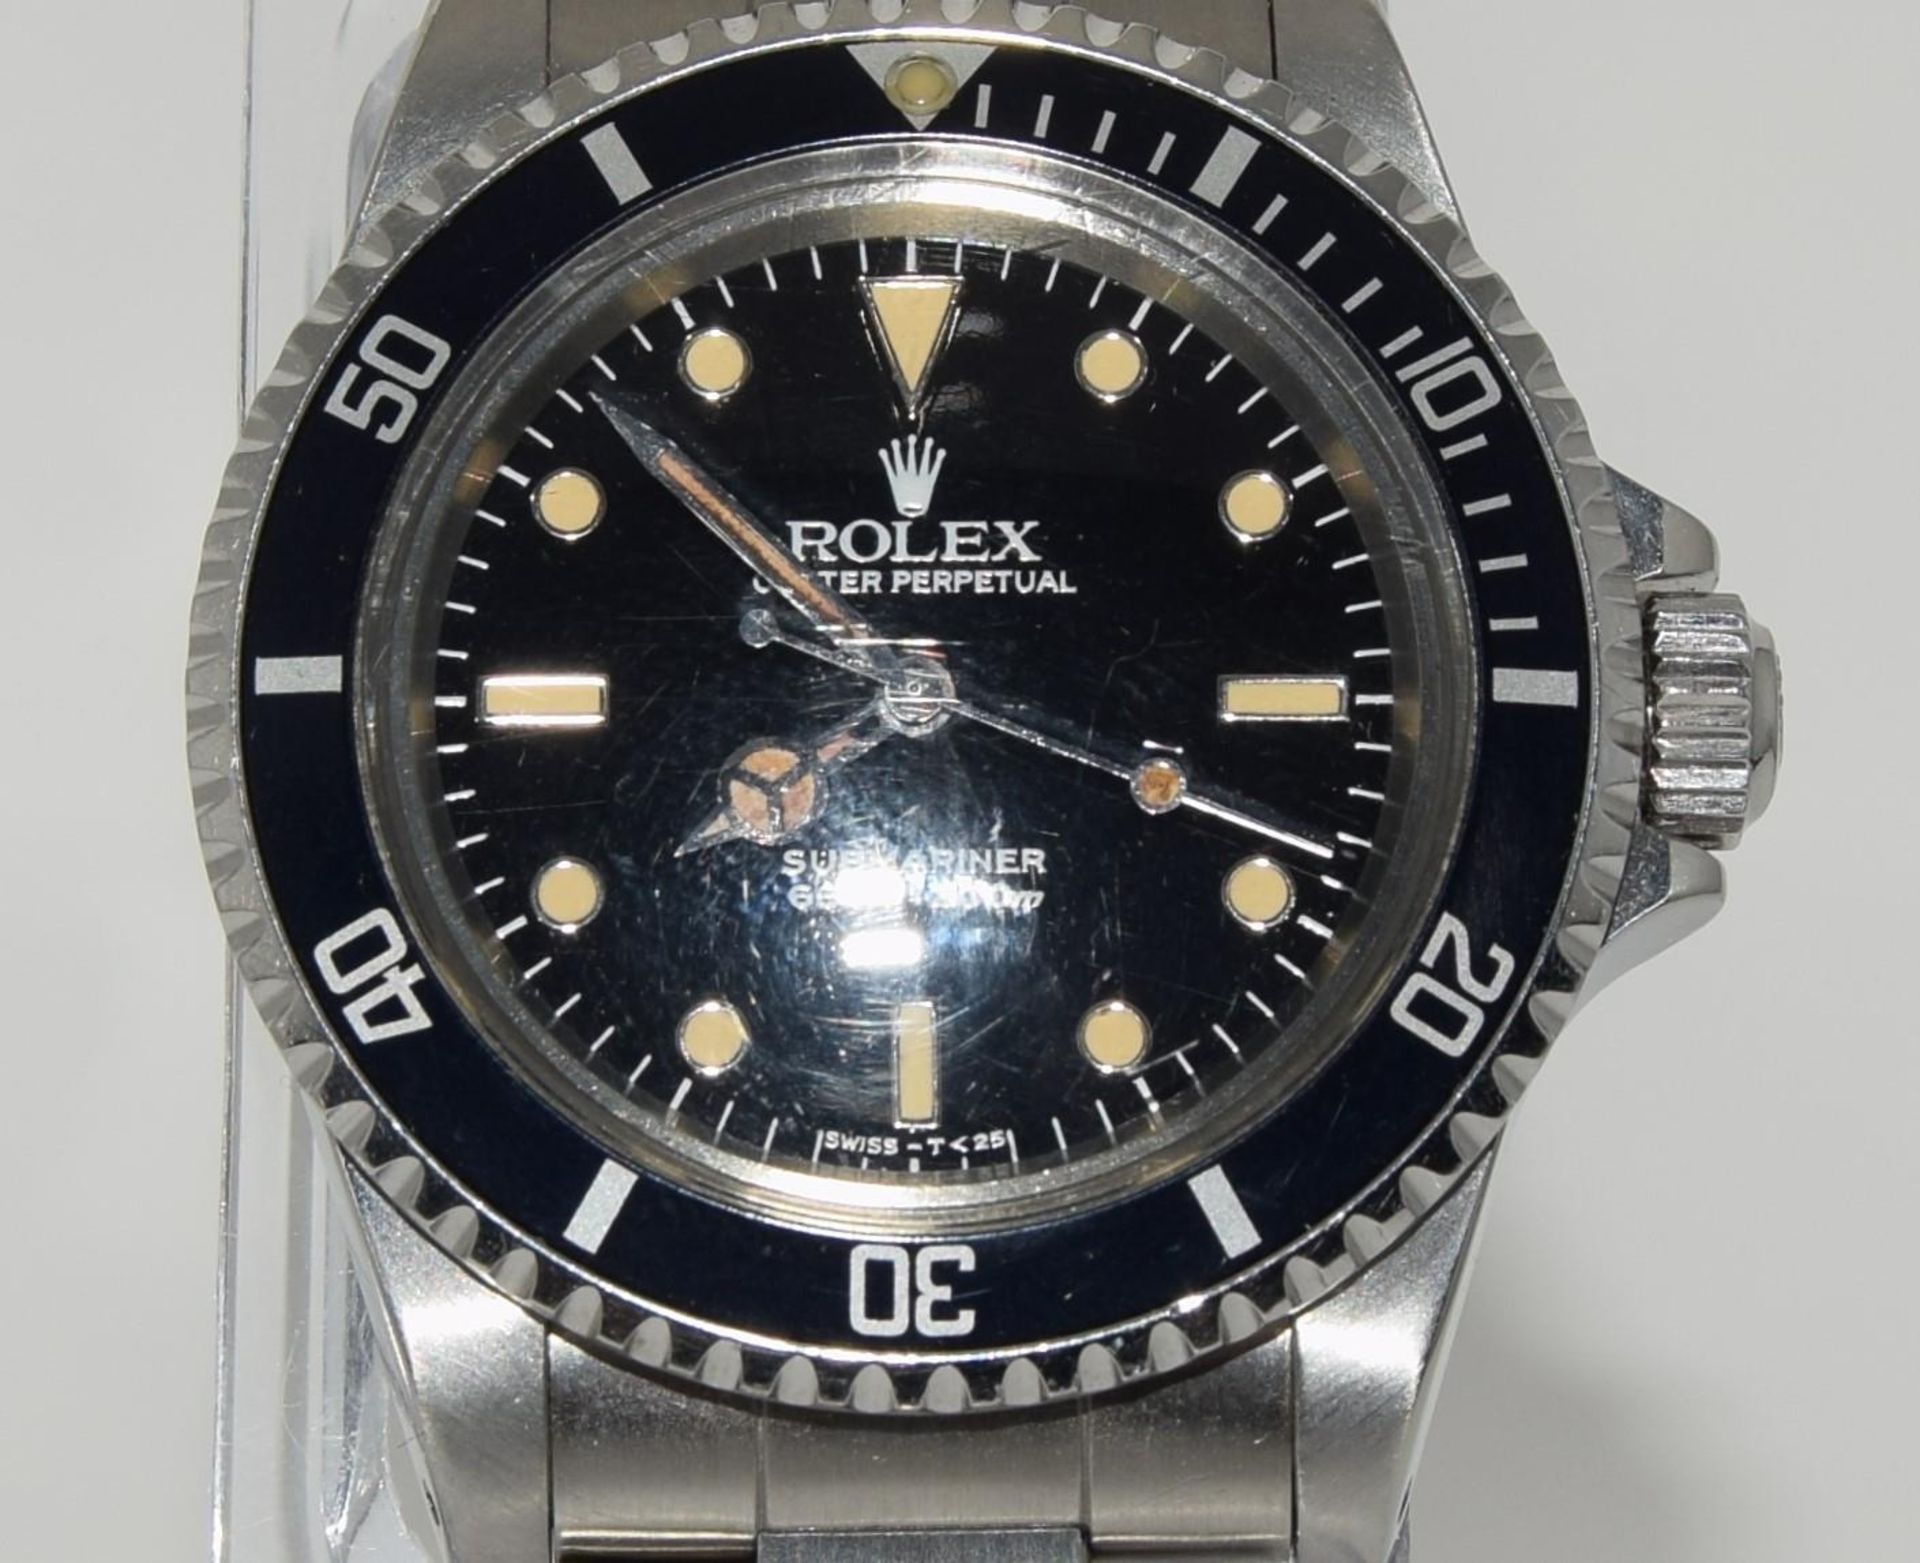 1985 Rolex Submariner 5513, black dial and bezel (5512 case back) Box, No papers. (ref 46) - Image 3 of 10